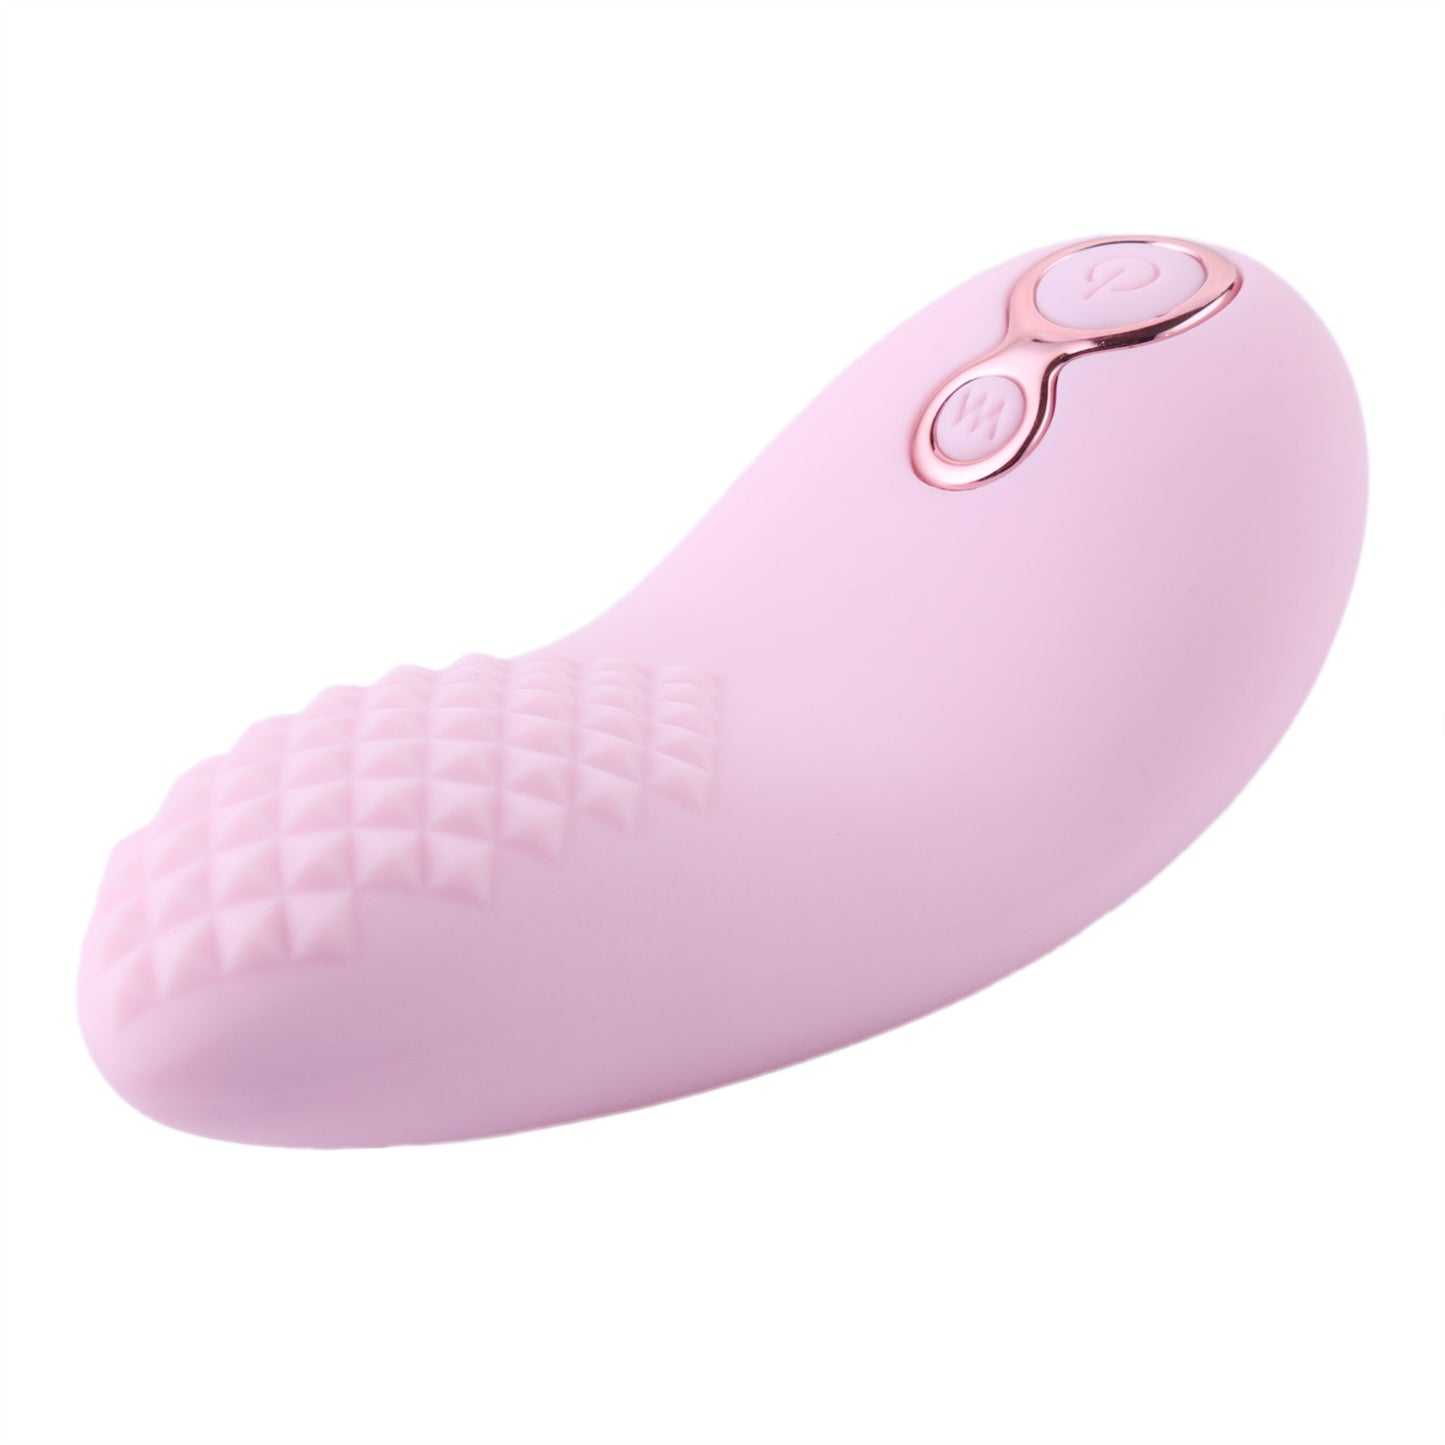 Tongue-shaped Vibrator with 9 positions USB rechargeable